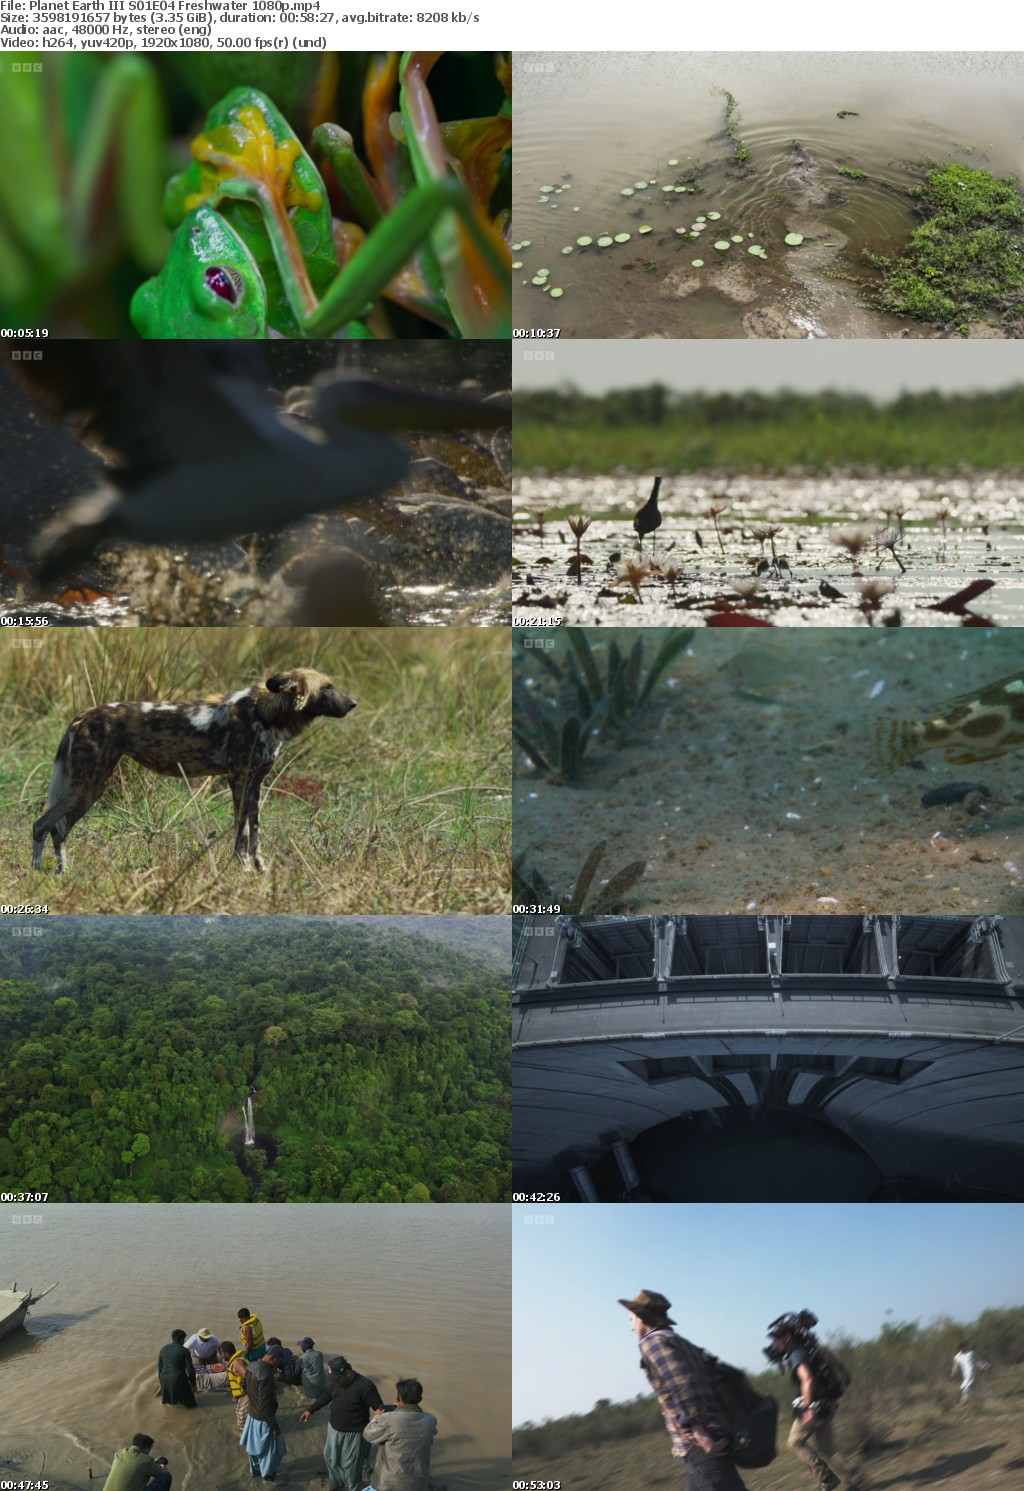 Planet Earth III S01E04 Freshwater (1080p HD, 50fps, soft Eng subs)